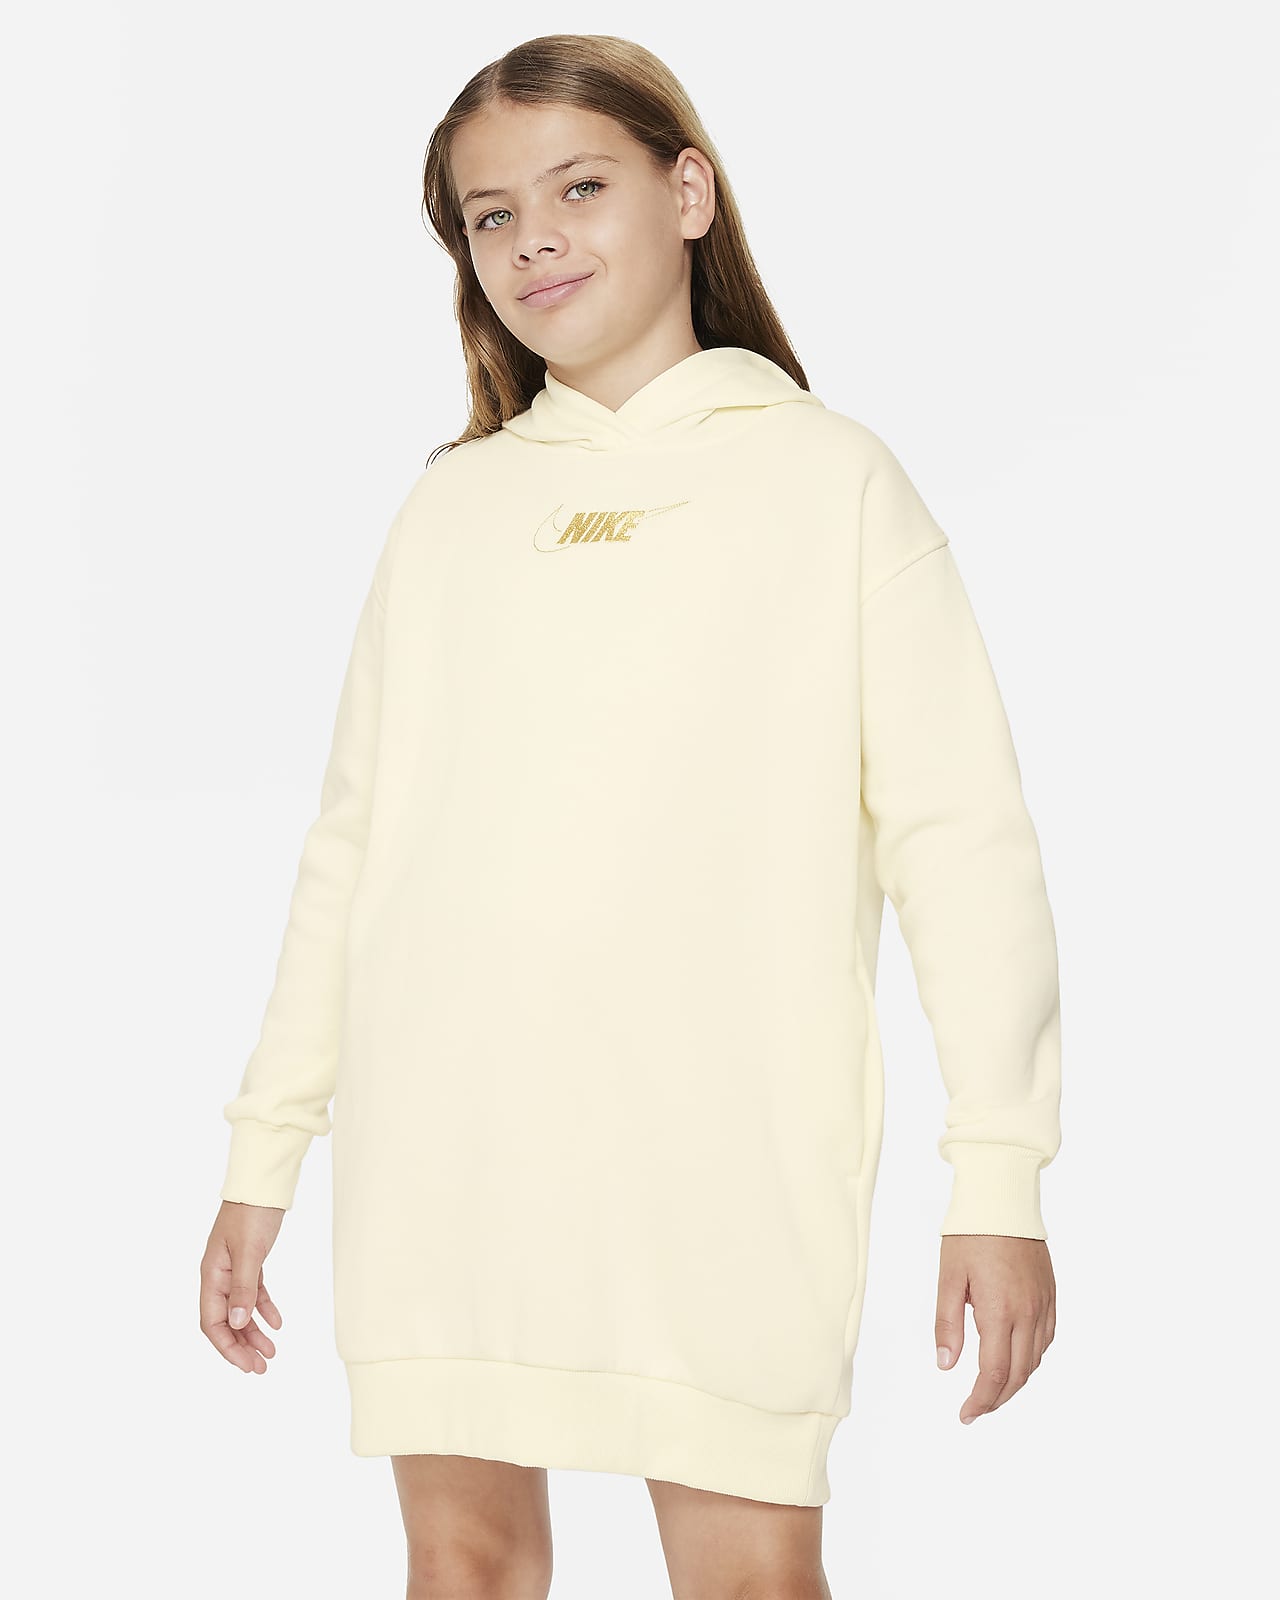 Guess - Girls White Cotton Hoodie Dress | Childrensalon Outlet